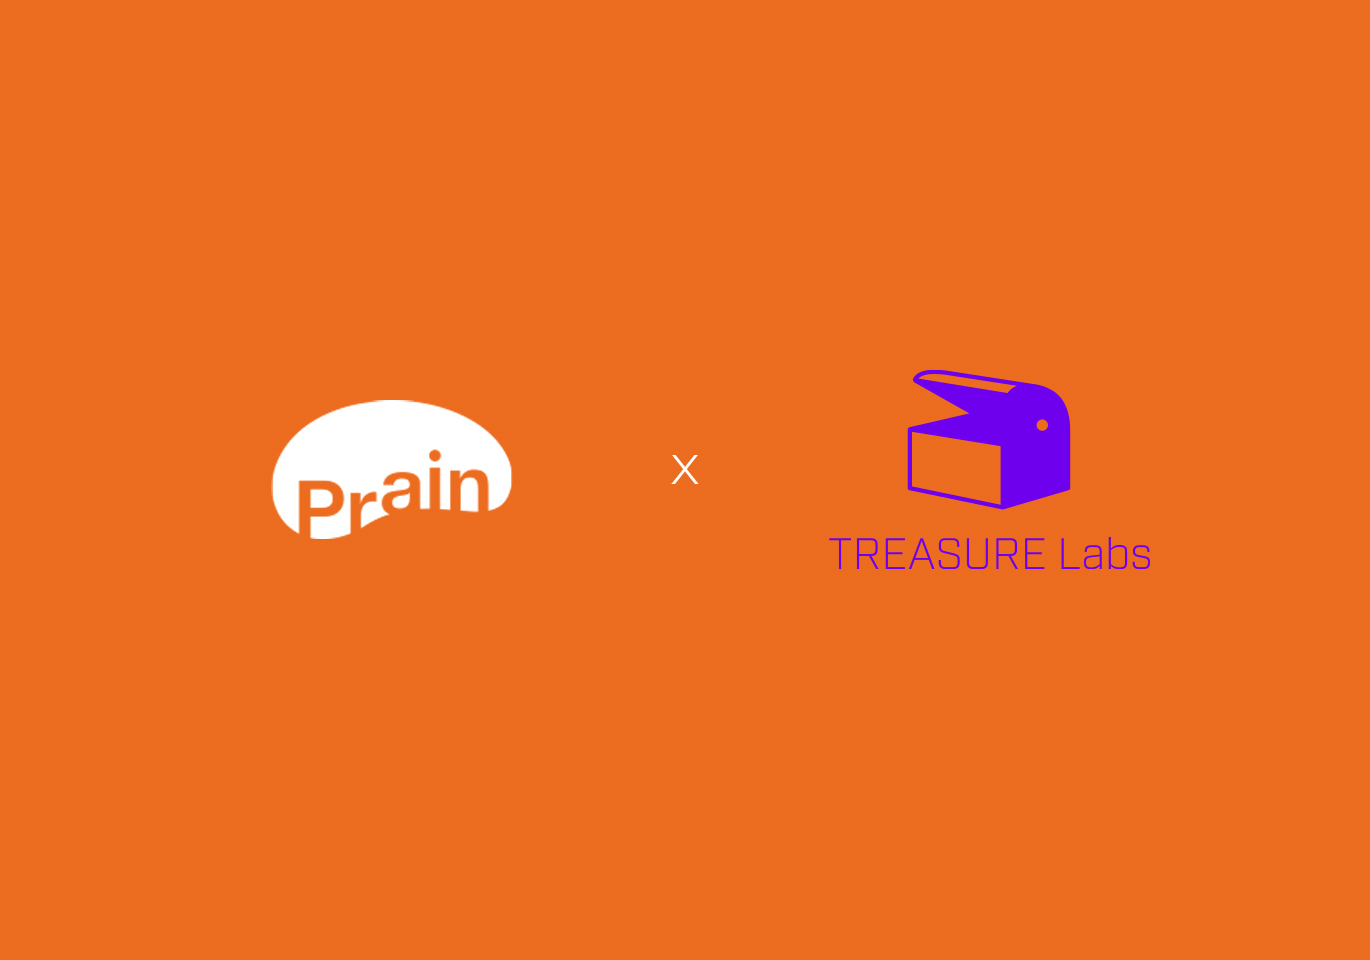 Prain Global Signs MOU with TREASURE Labs for Communications Projects in Blockchain